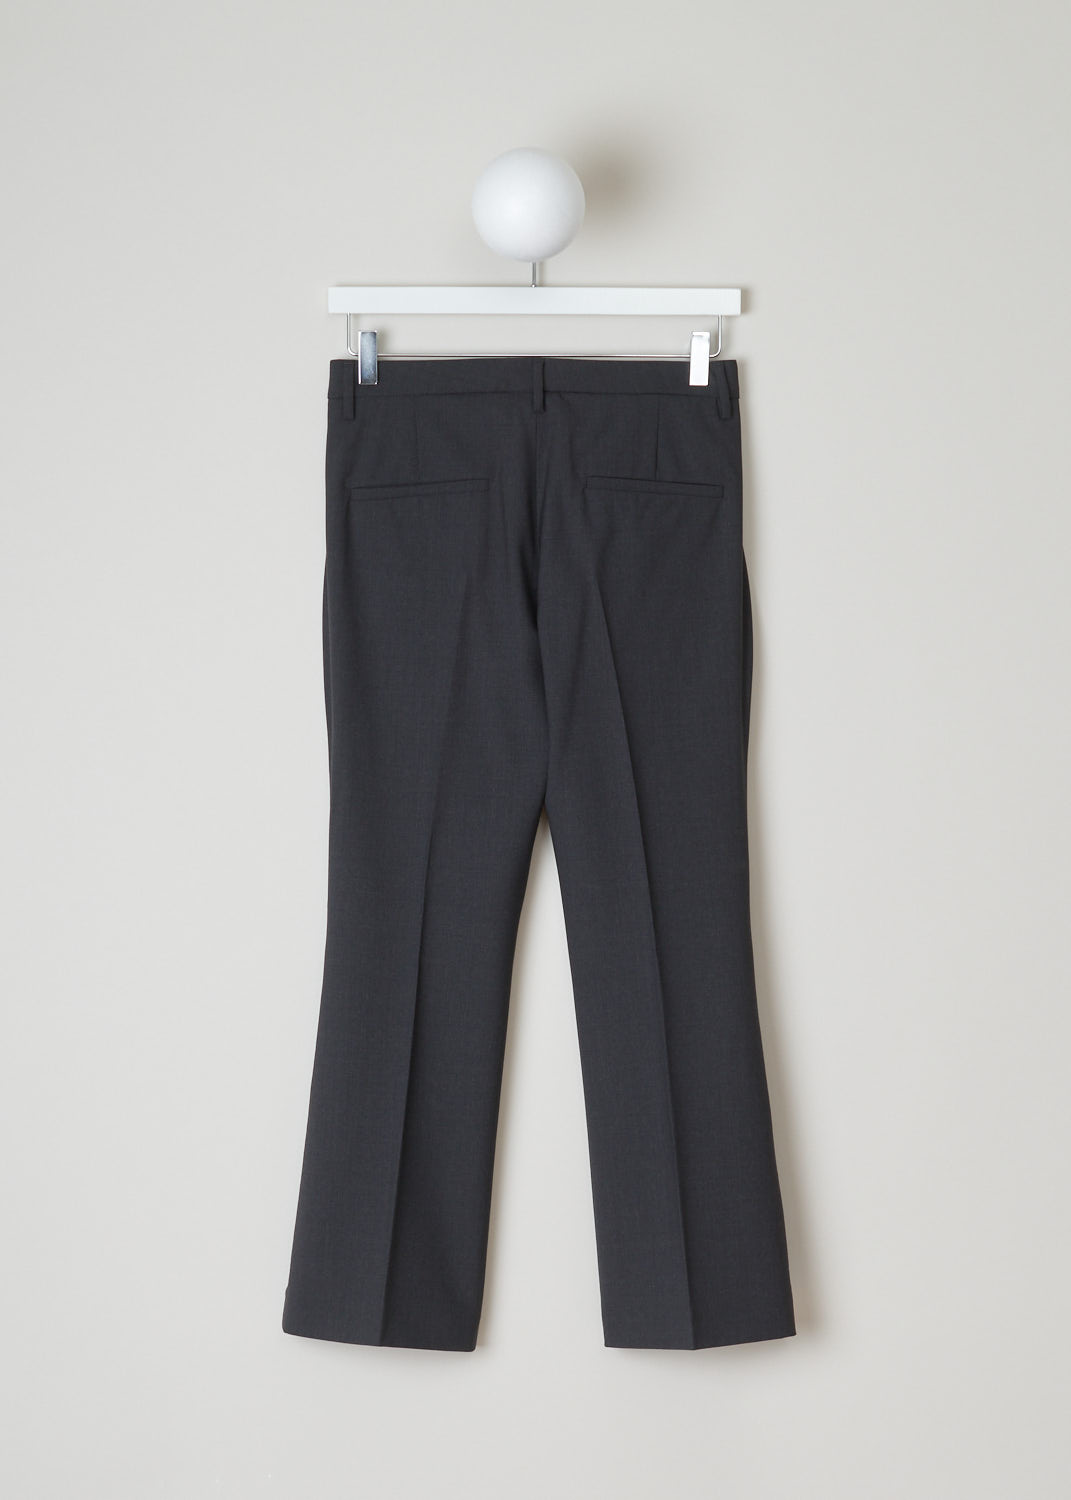 Brunello Cucinelli, Dark grey pants, M0W07P1951_C796, grey, back, Dark grey pants, featuring a flat front model. This low-cut model has a cropped length, slanted pockets at the front and two welt pockets at the back. Fastening option on this model is a zipper, a metal clip and a backing button. 